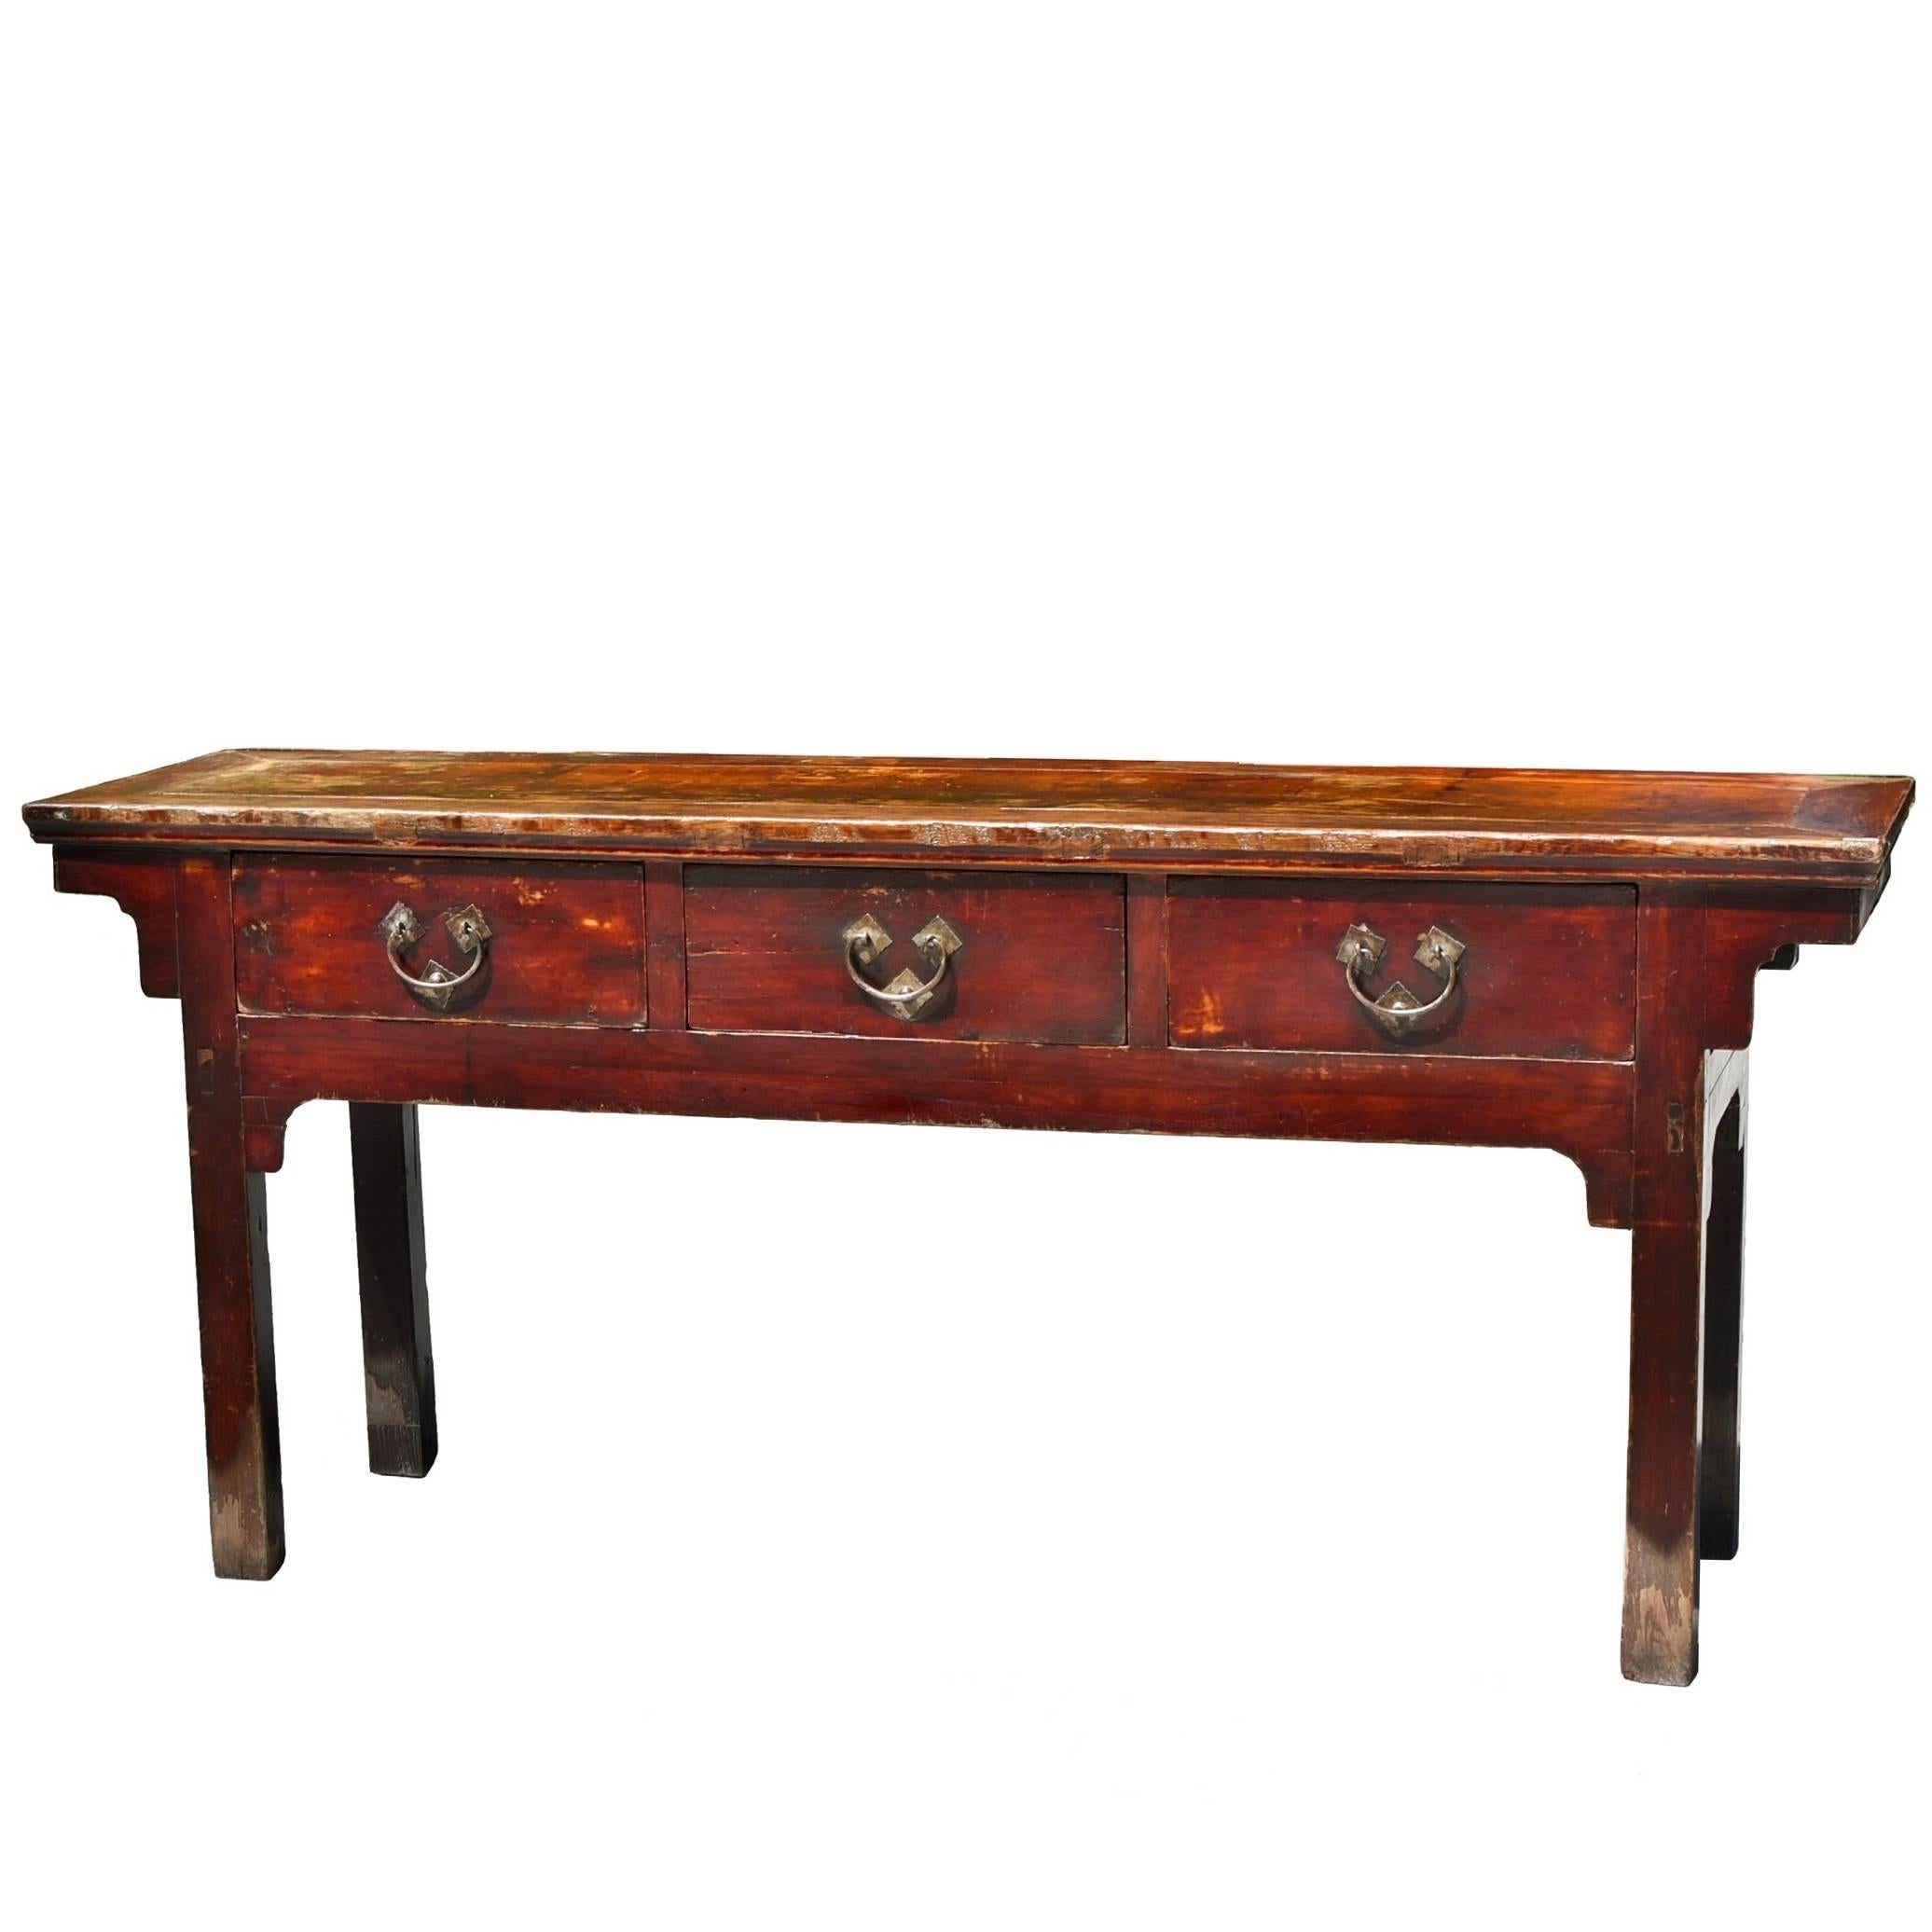 Antique Chinese Console Table with Three Drawers